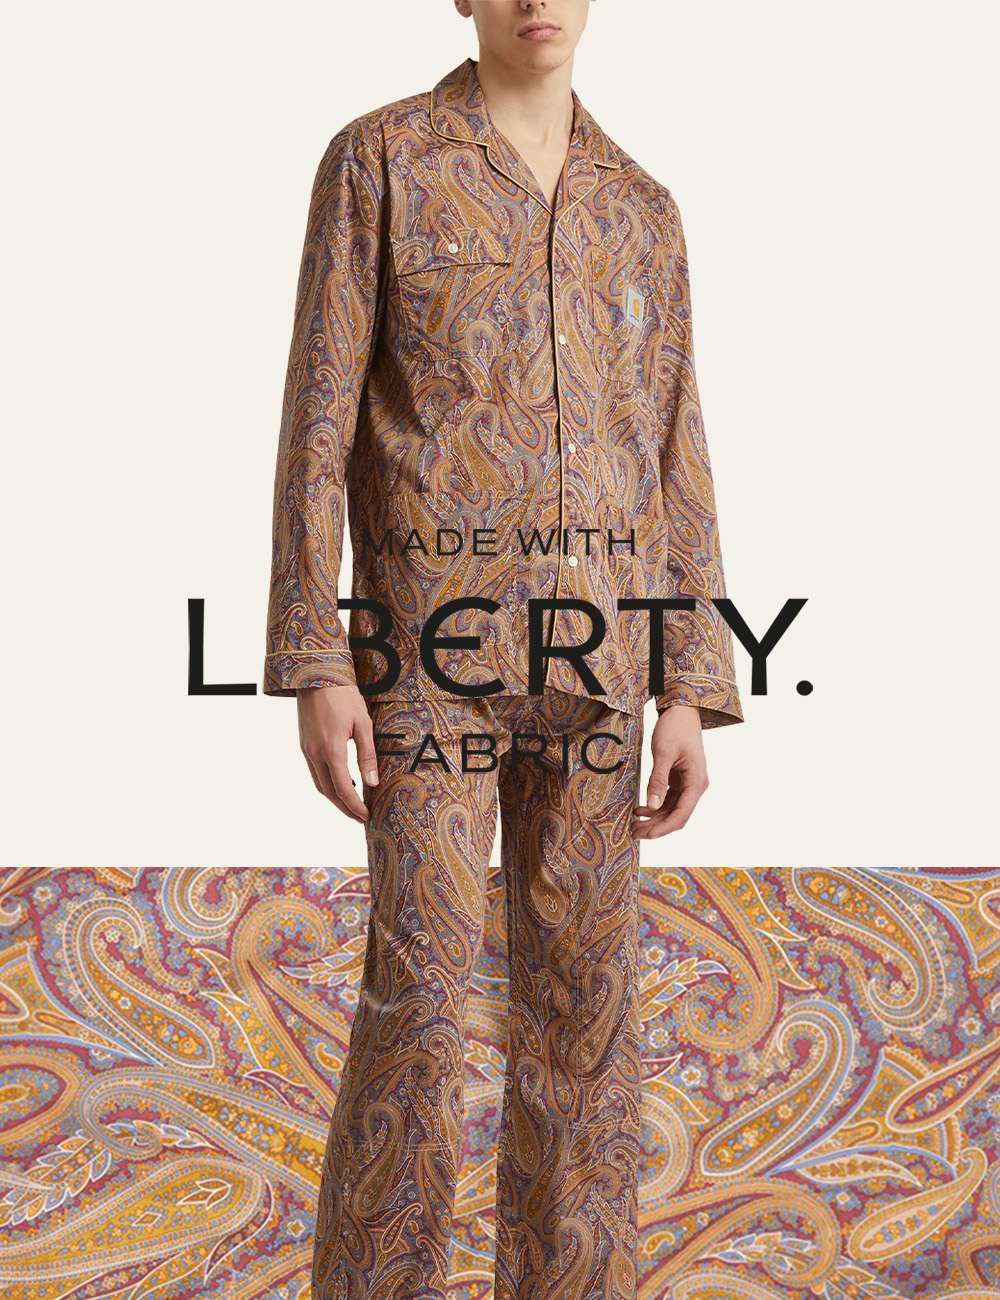 færdig Tilladelse Individualitet Carhartt WIP's New 'Made with Liberty Fabrics' Collection | Liberty